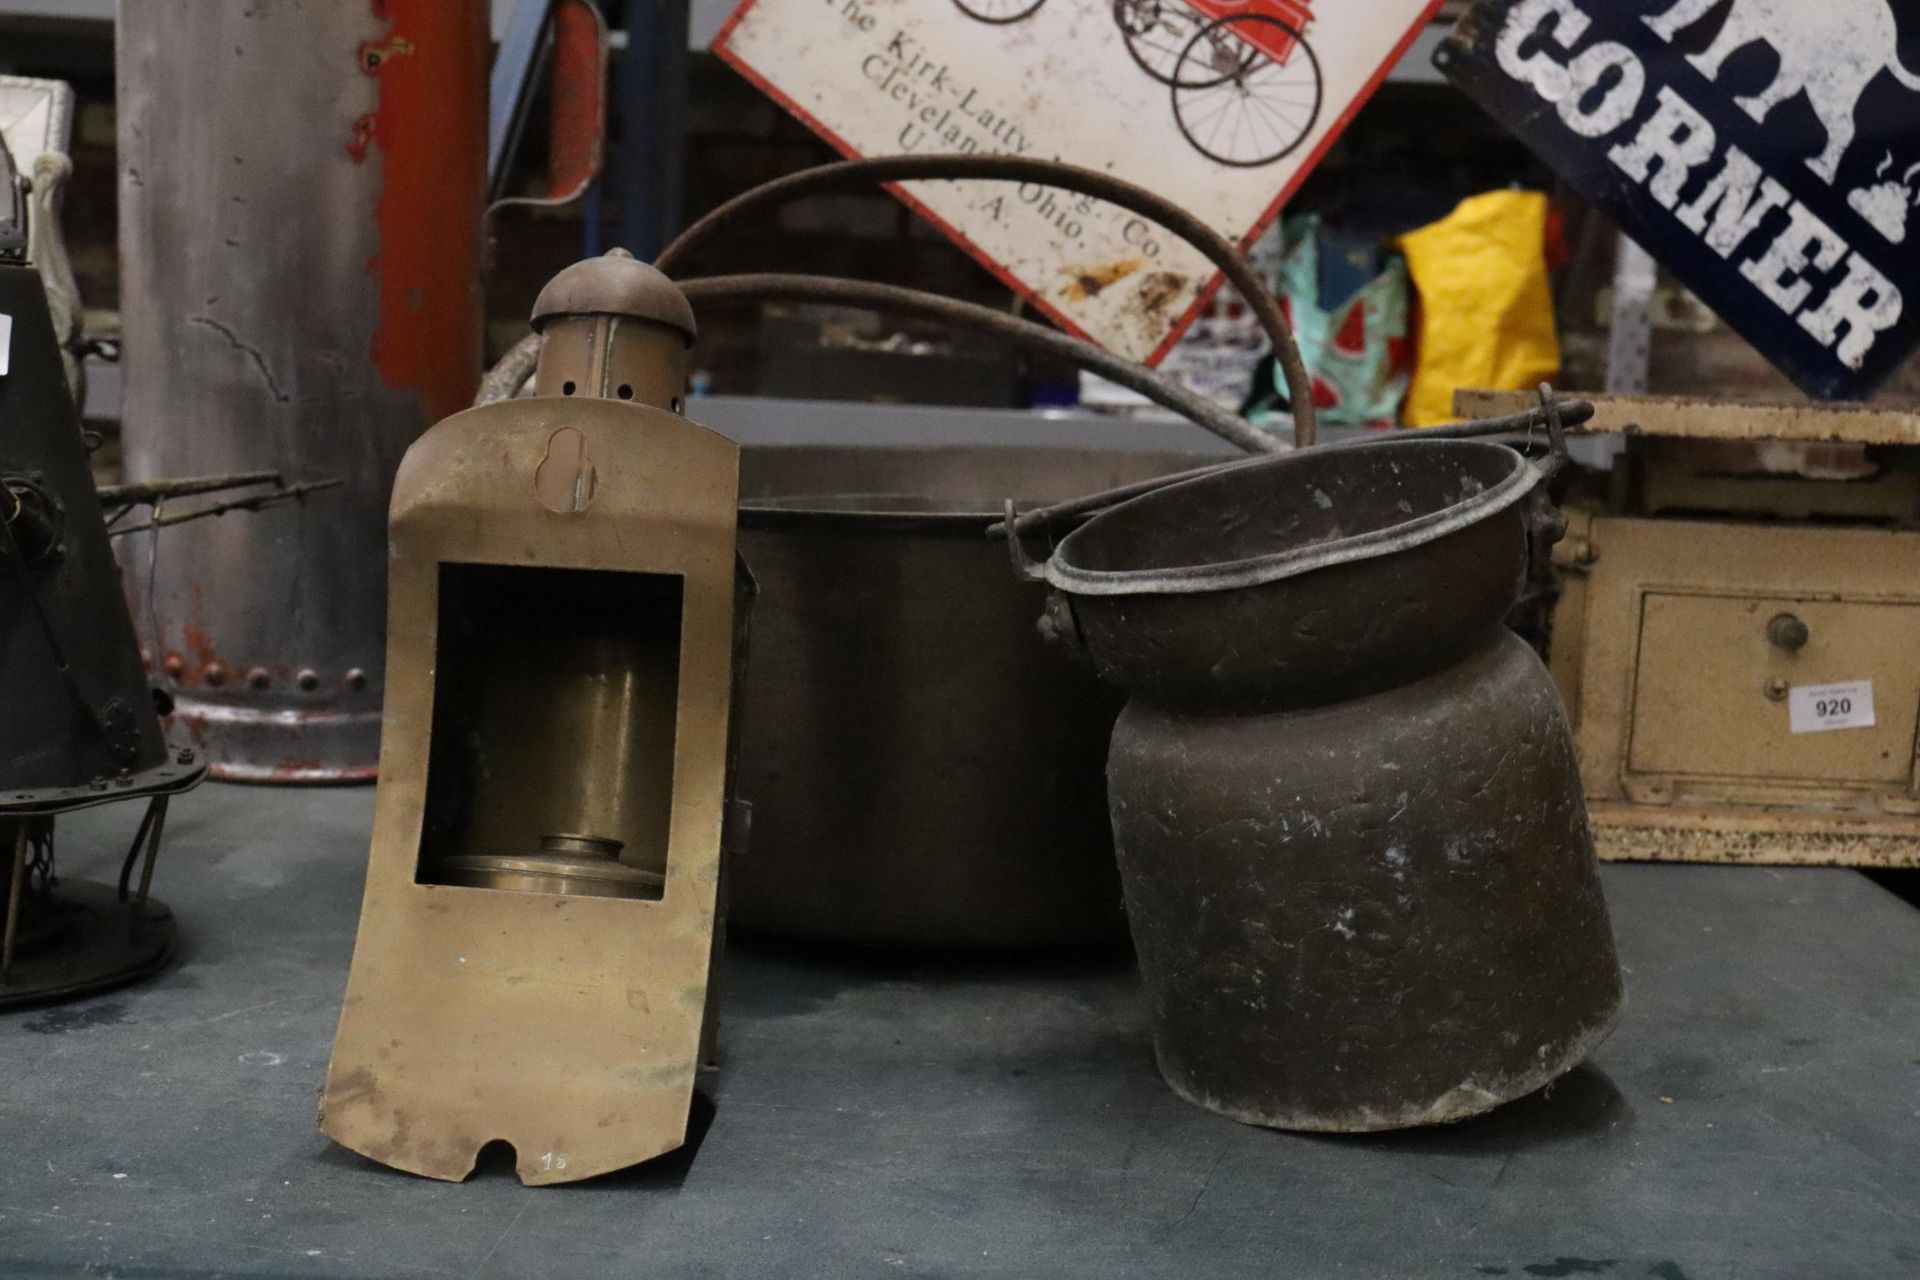 TWO LARGE HEAVY CAST PANS, A VINTAGE BRASS LAMP - A/F AND A SMALL CHURN